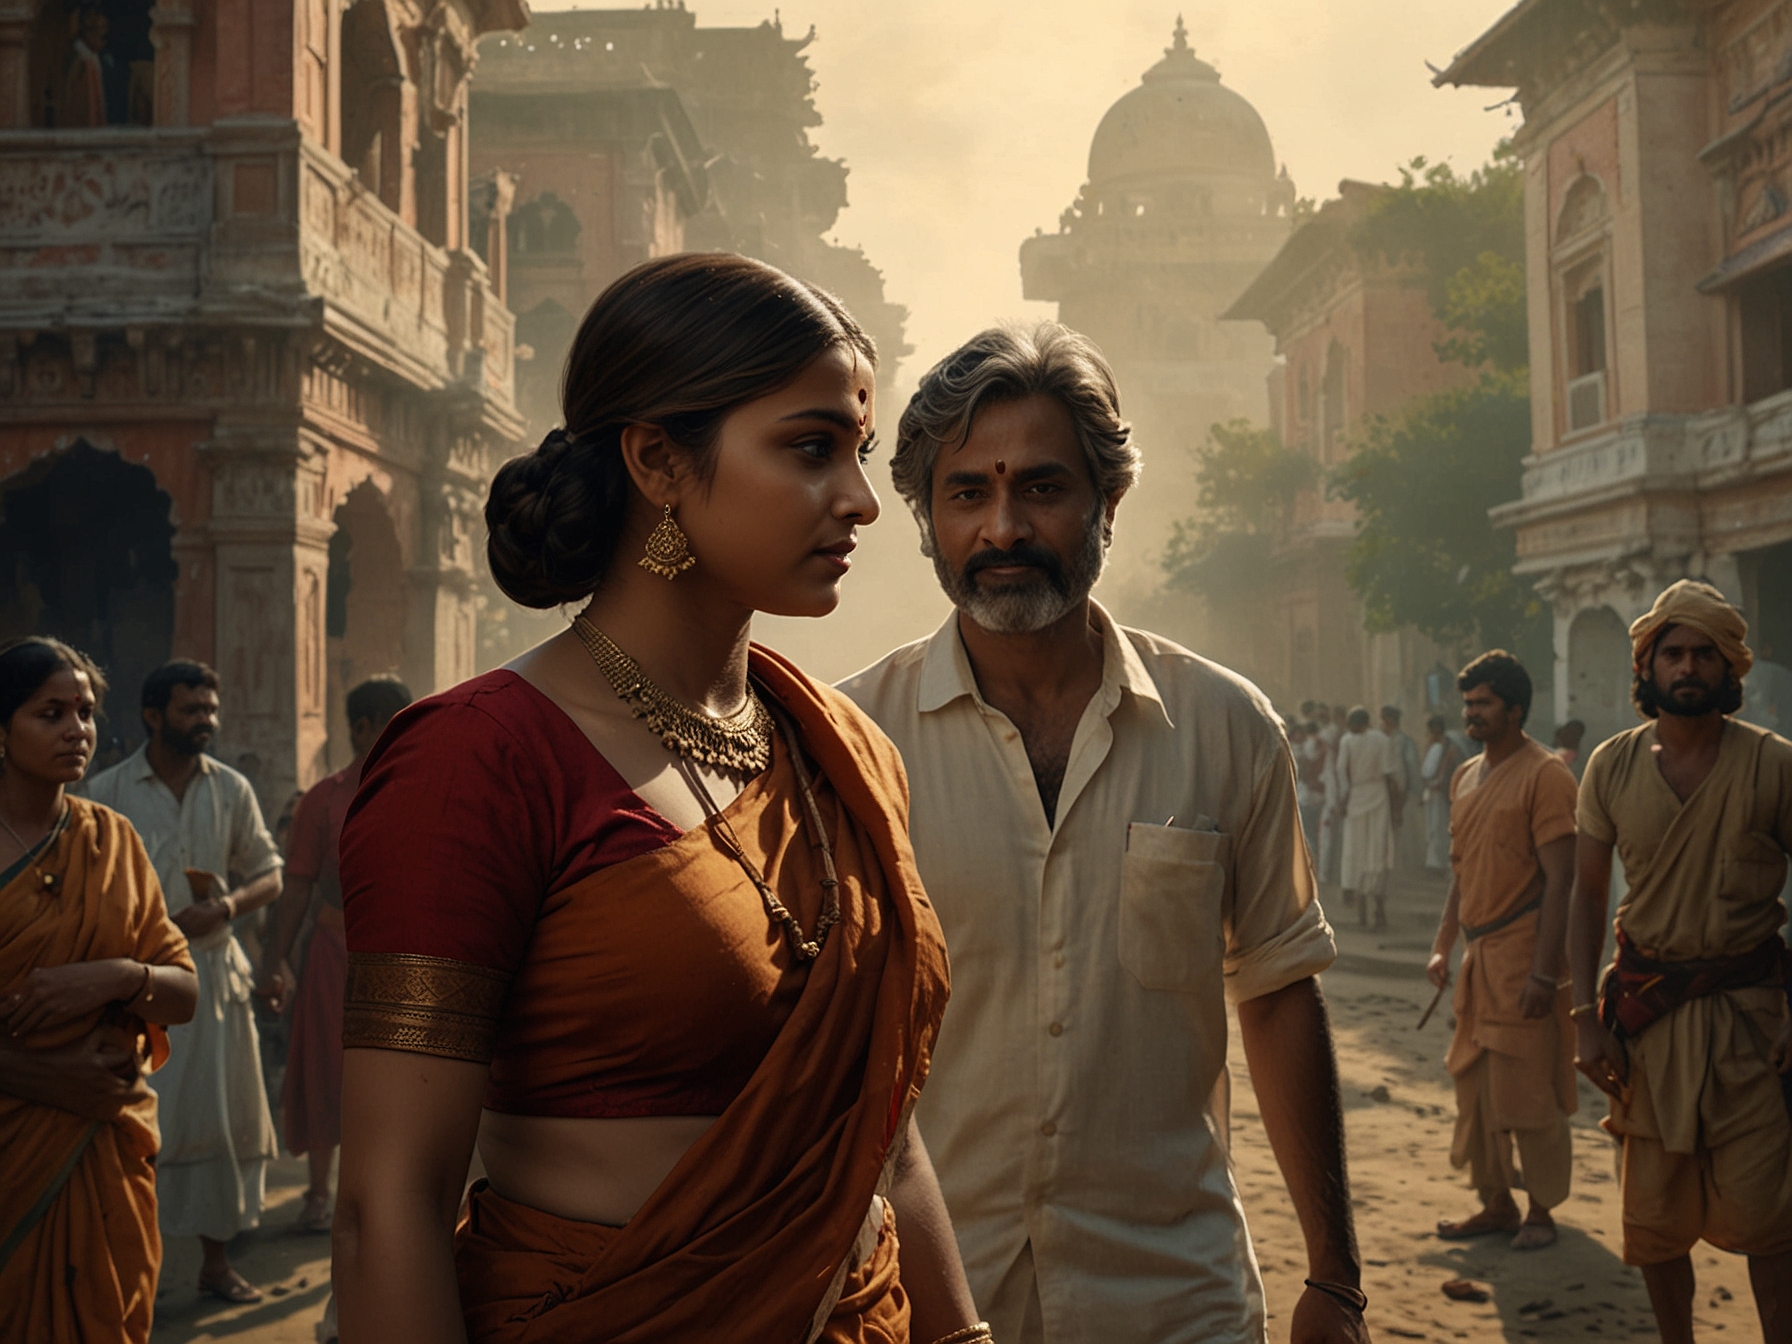 A still from 'Heeramandi,' depicting the rich visual splendor and intricate period setting of pre-independent India, emphasizing the show's blend of historical authenticity and artistic grandeur.